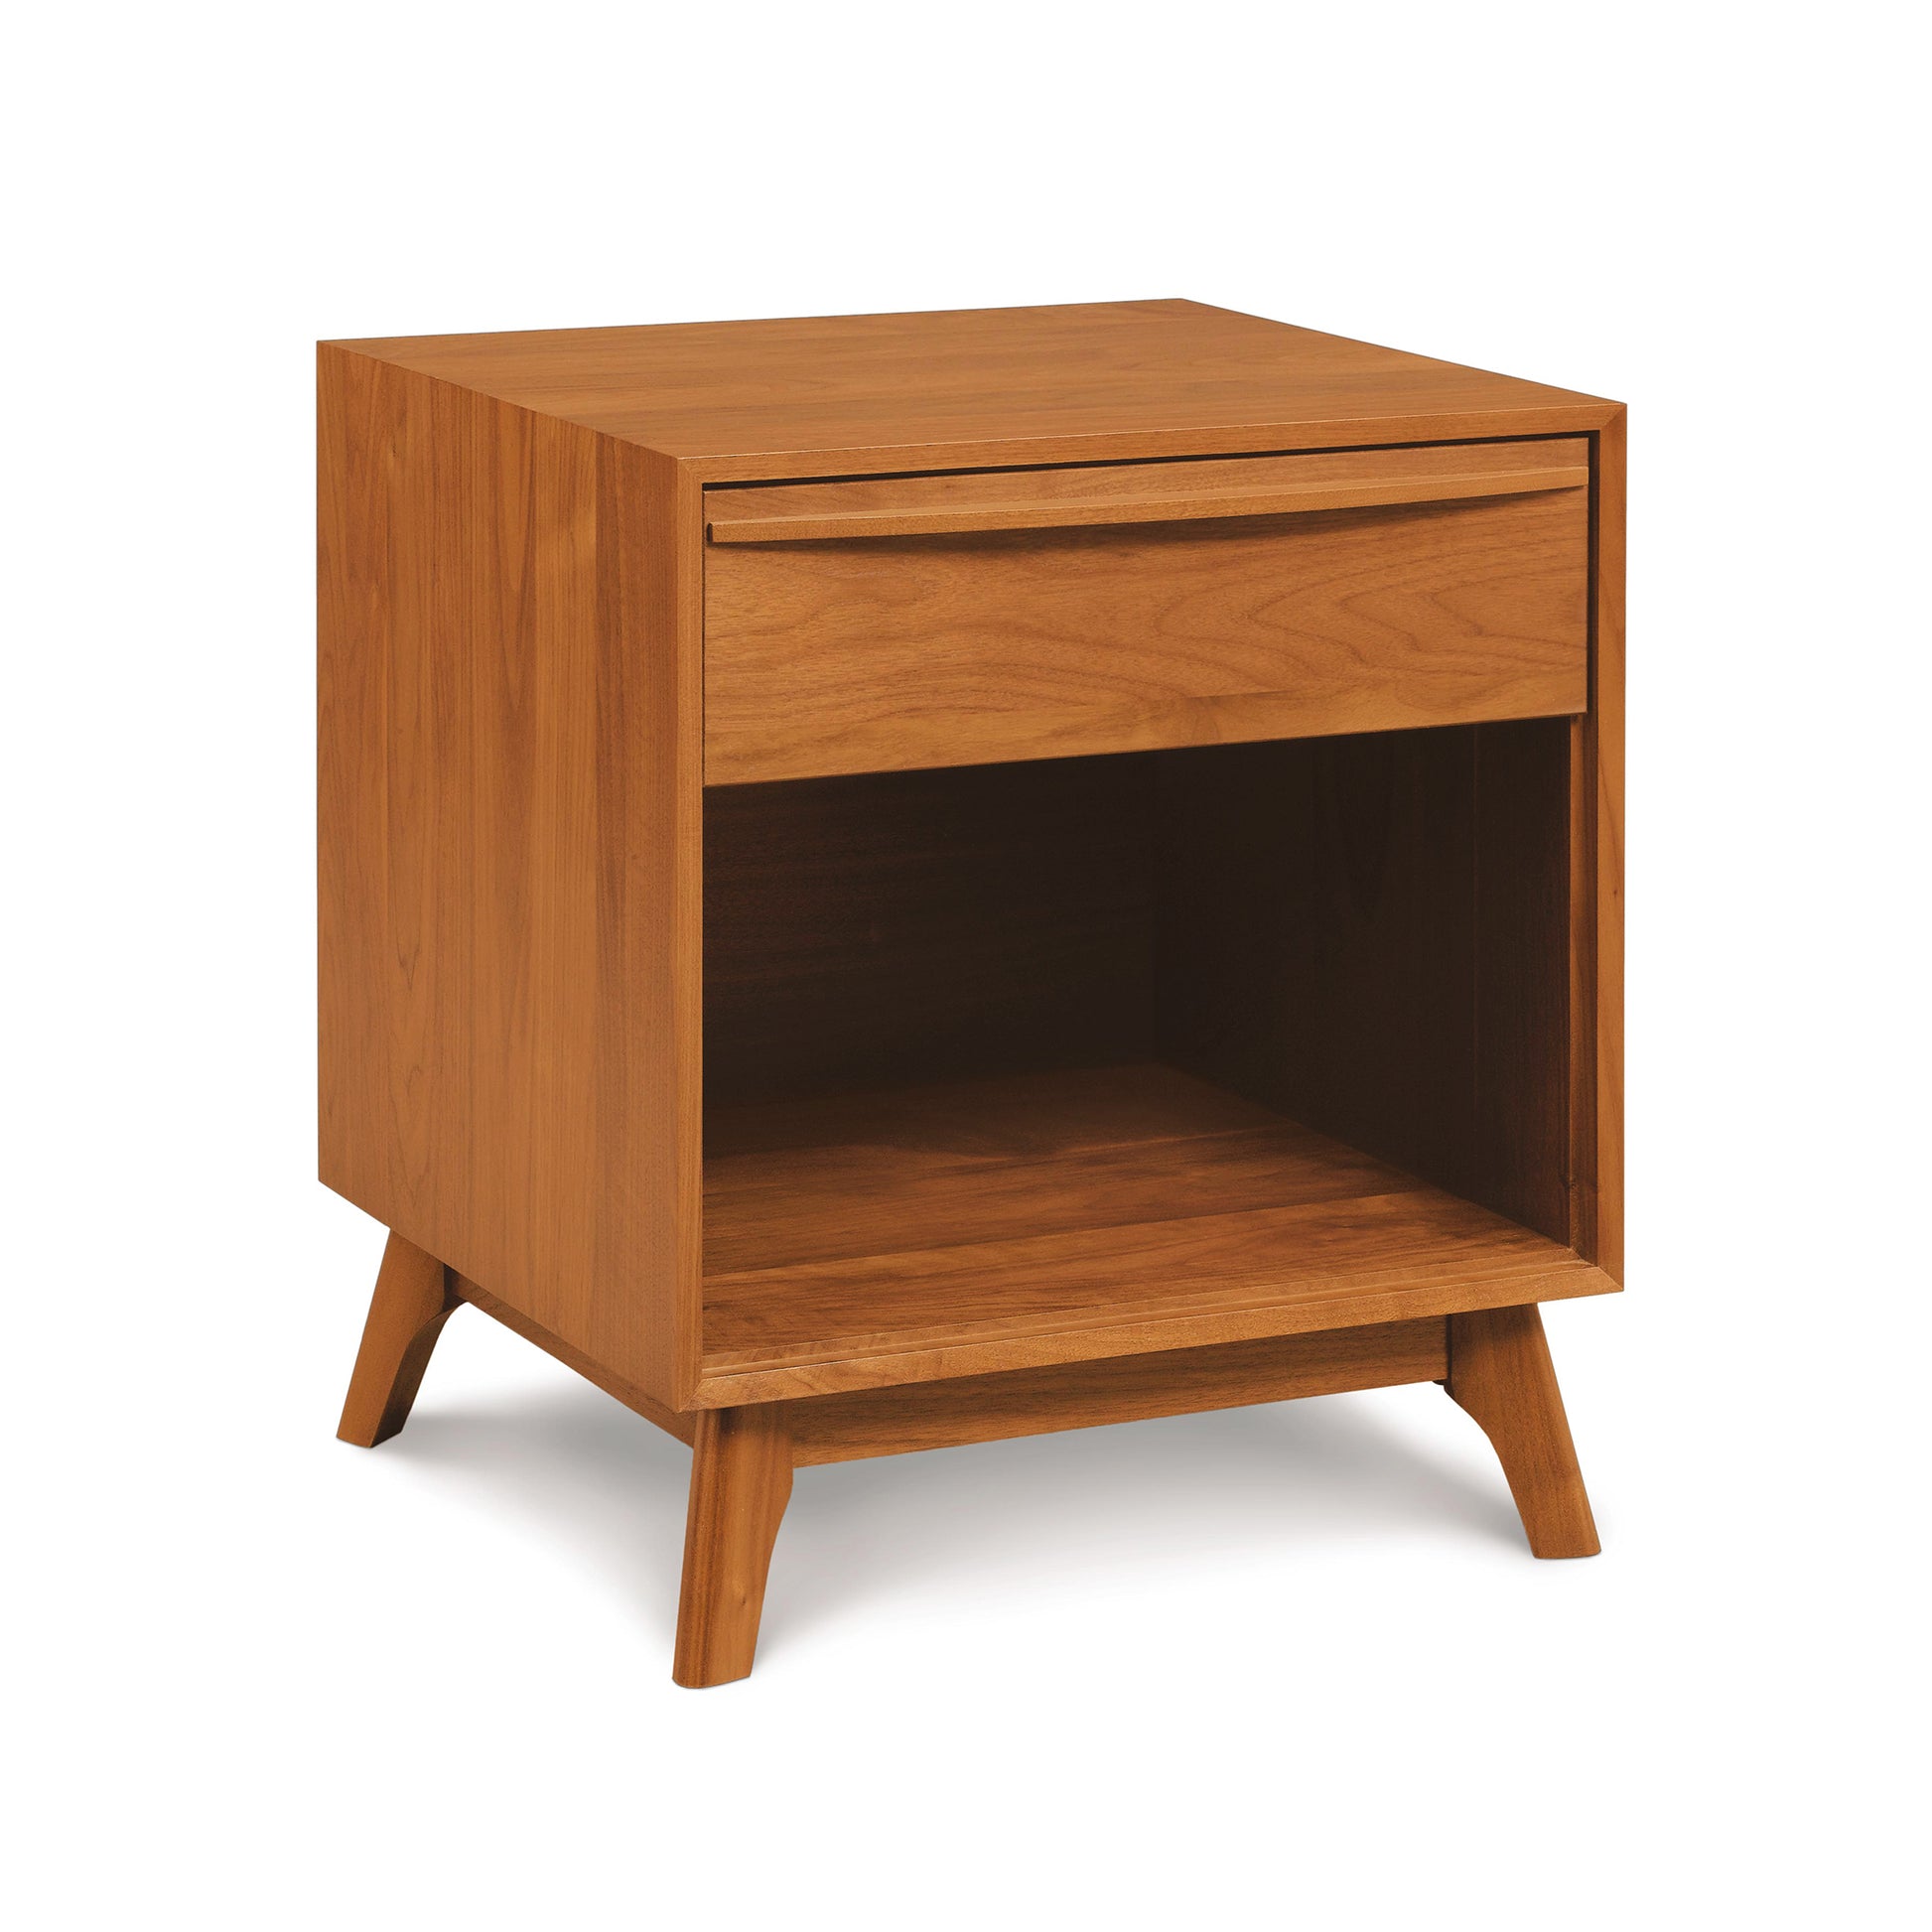 Catalina 1-Drawer Enclosed Shelf Nightstand from Copeland Furniture, with a single drawer and an open lower shelf, placed against a white background.